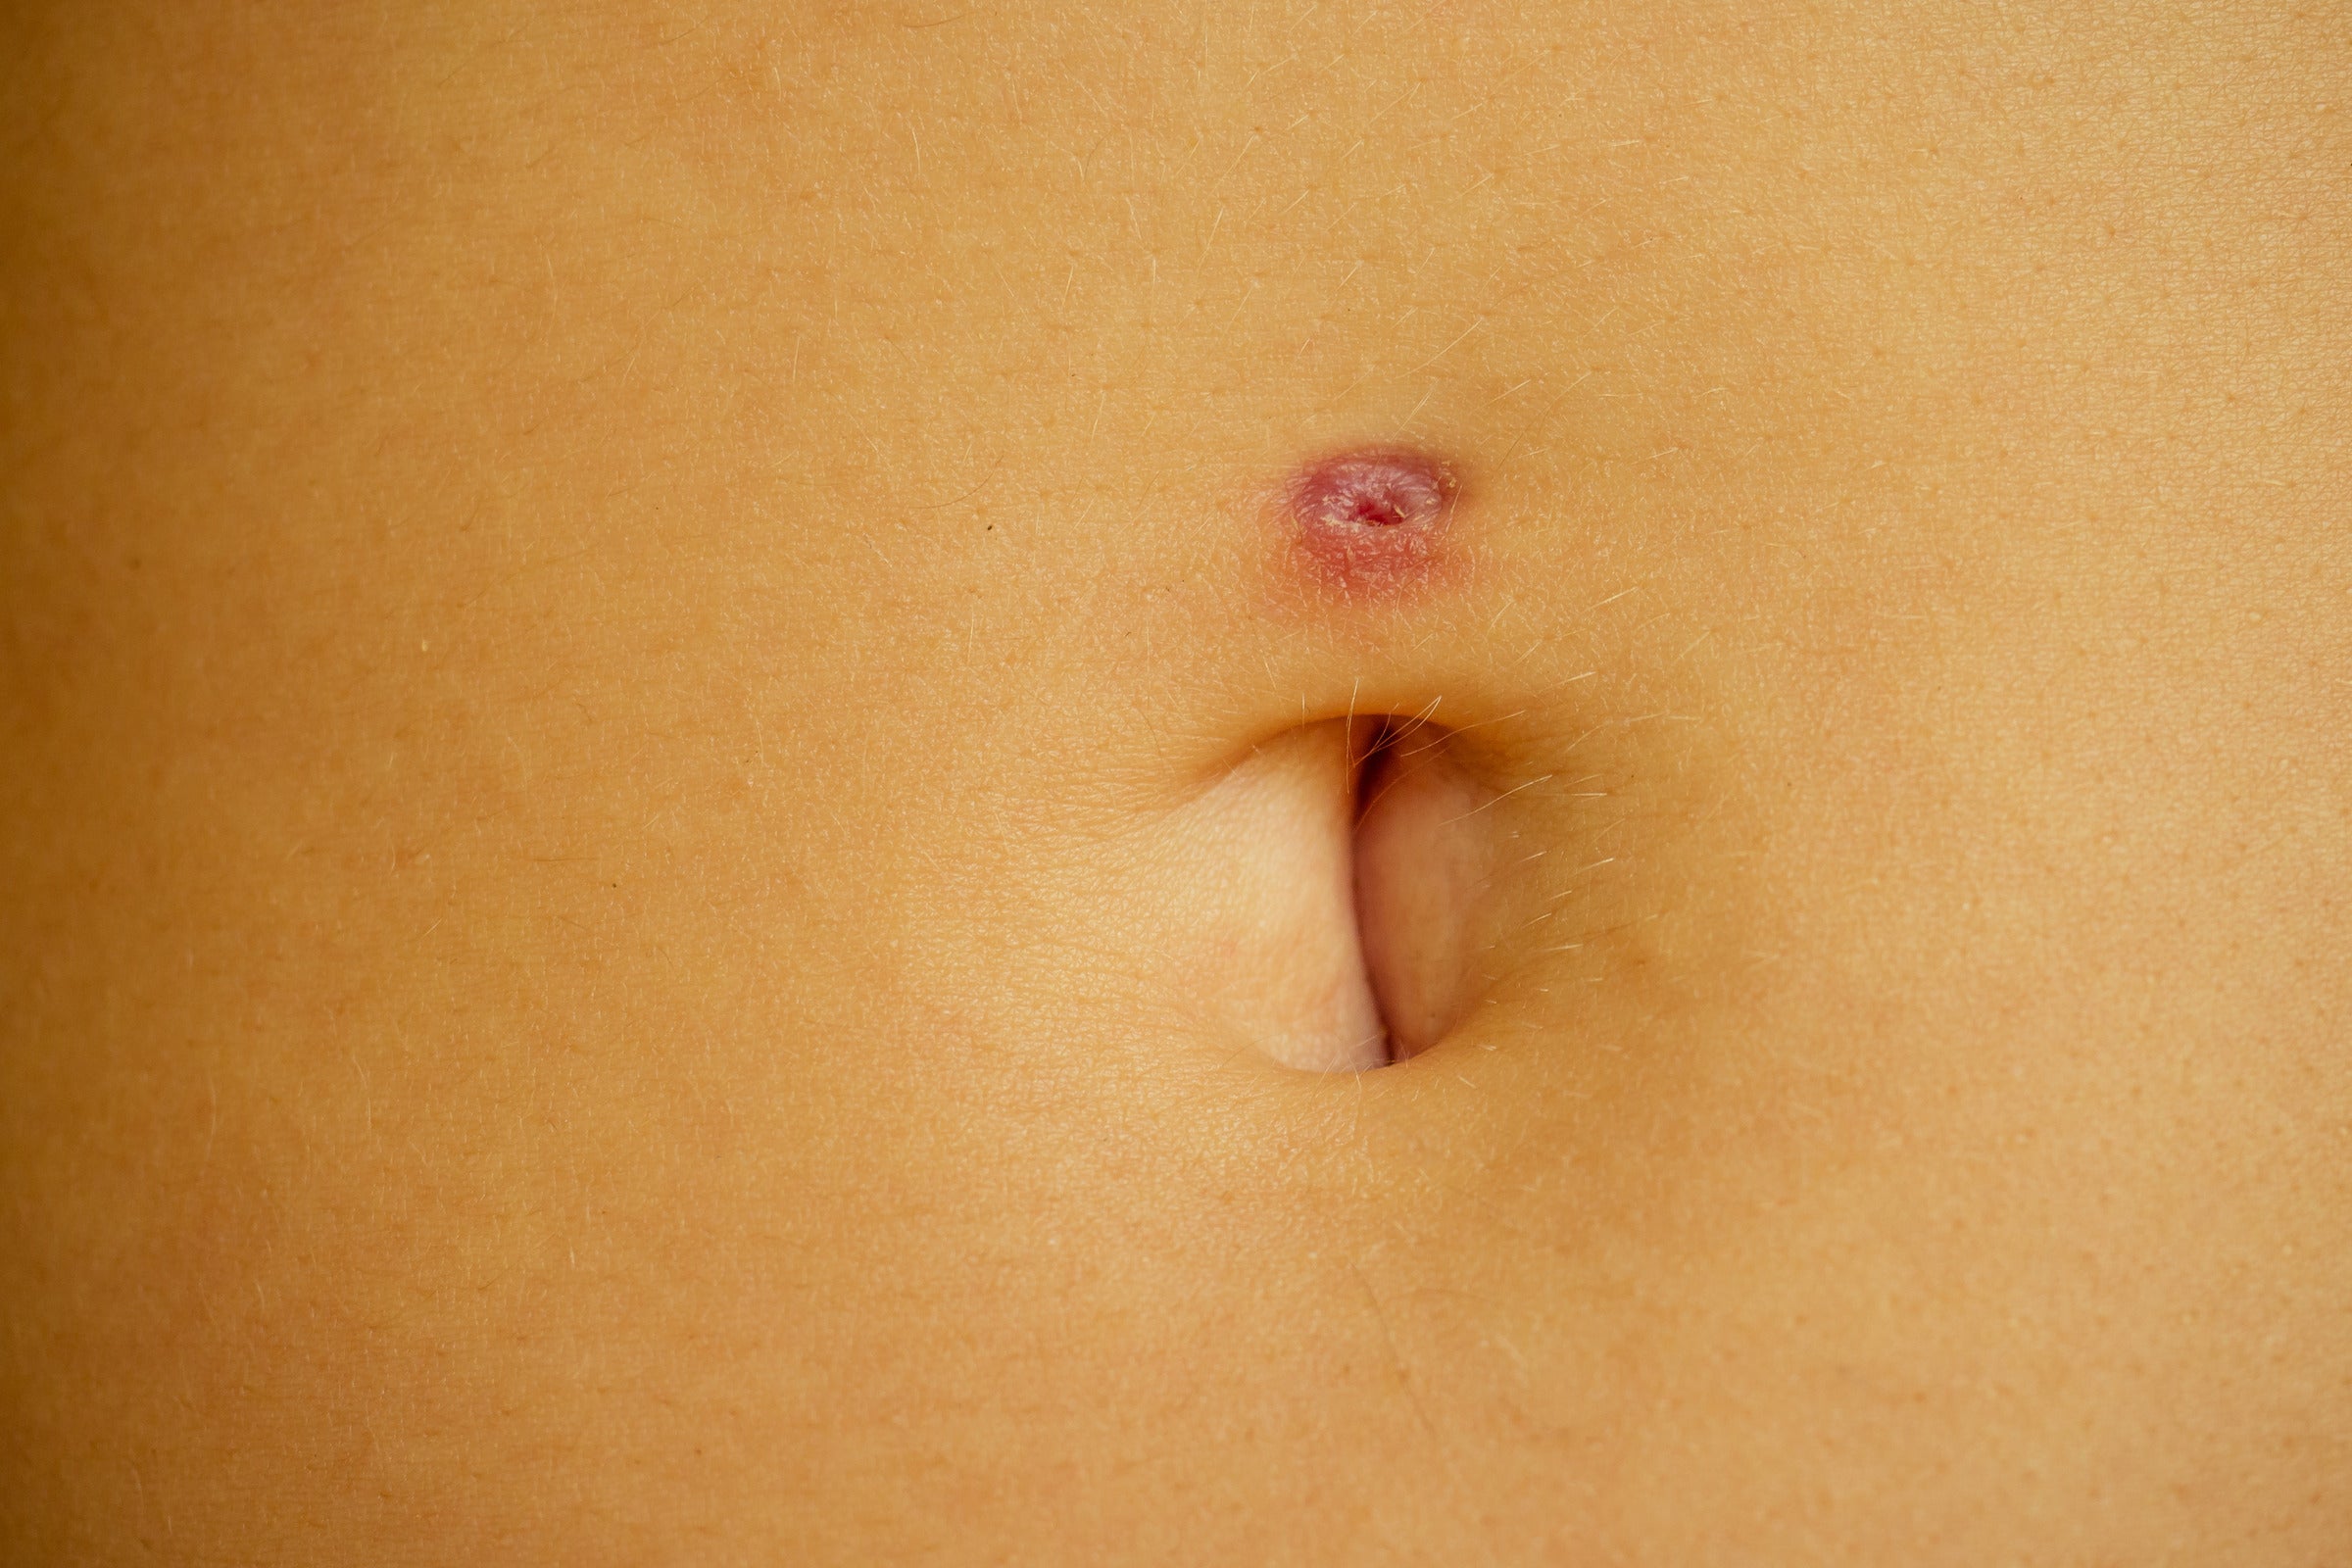 Tips for preventing belly button piercing